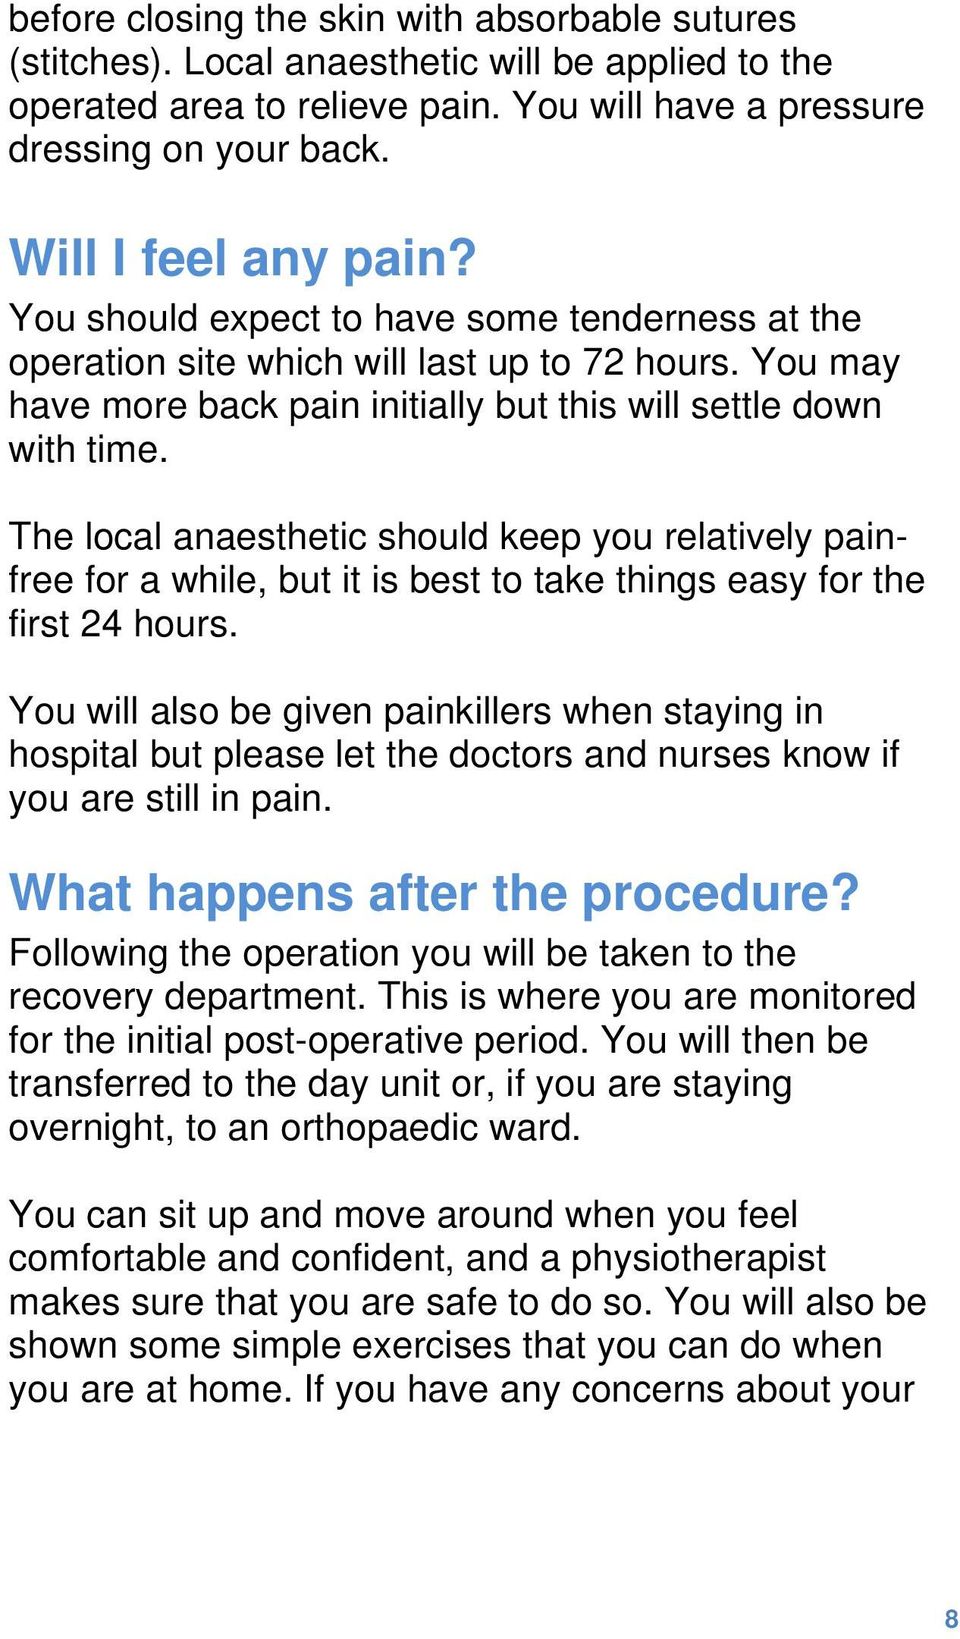 The local anaesthetic should keep you relatively painfree for a while, but it is best to take things easy for the first 24 hours.